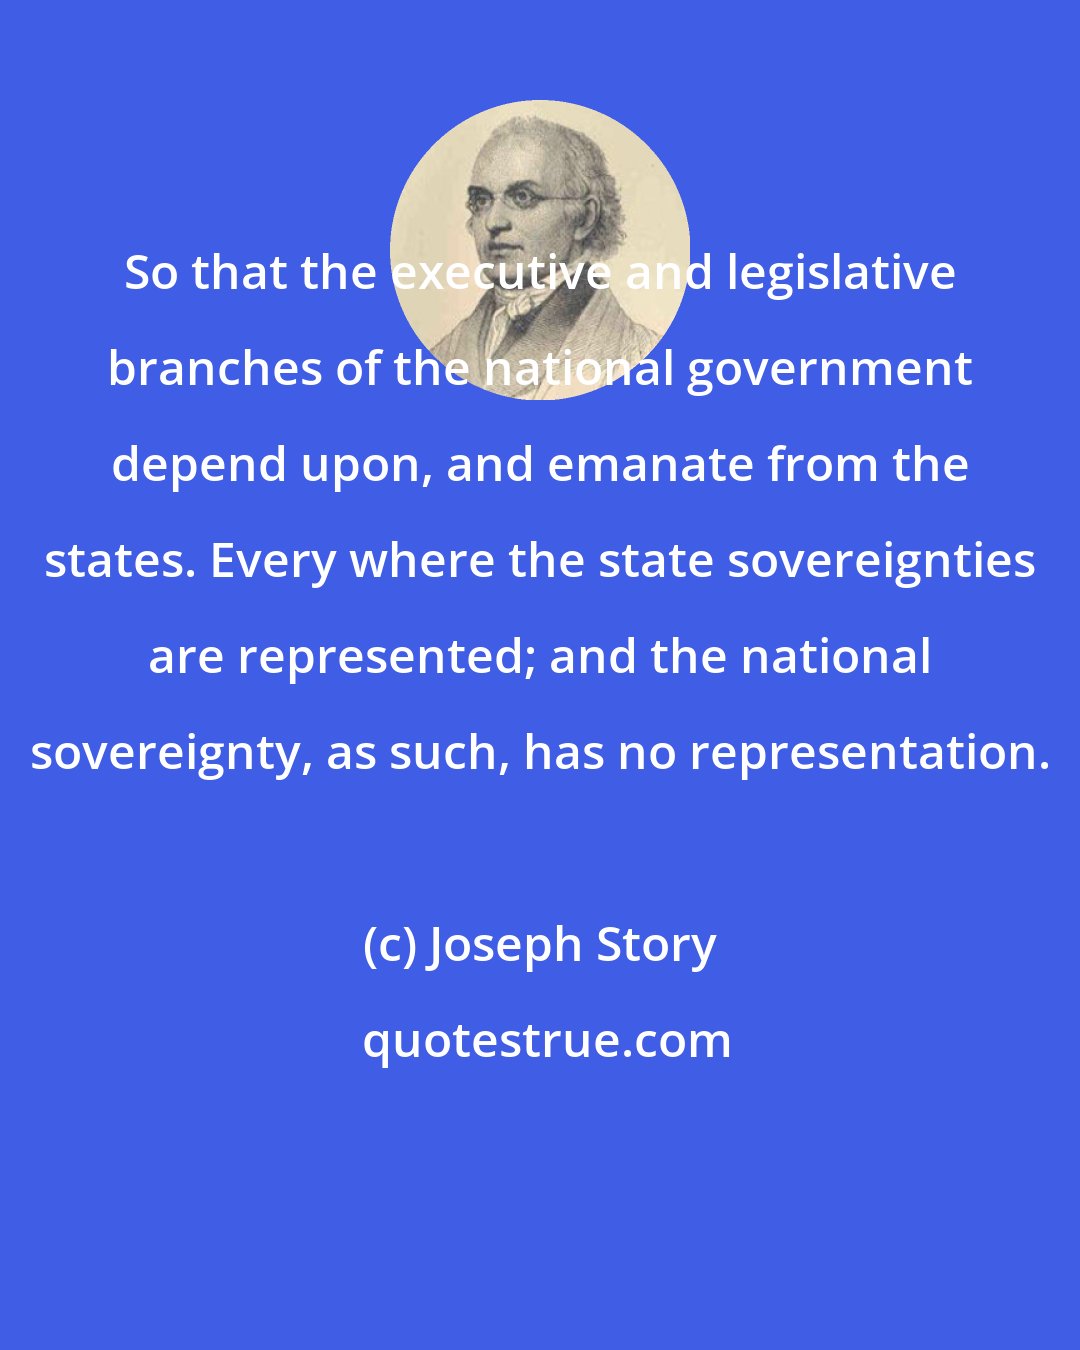 Joseph Story: So that the executive and legislative branches of the national government depend upon, and emanate from the states. Every where the state sovereignties are represented; and the national sovereignty, as such, has no representation.